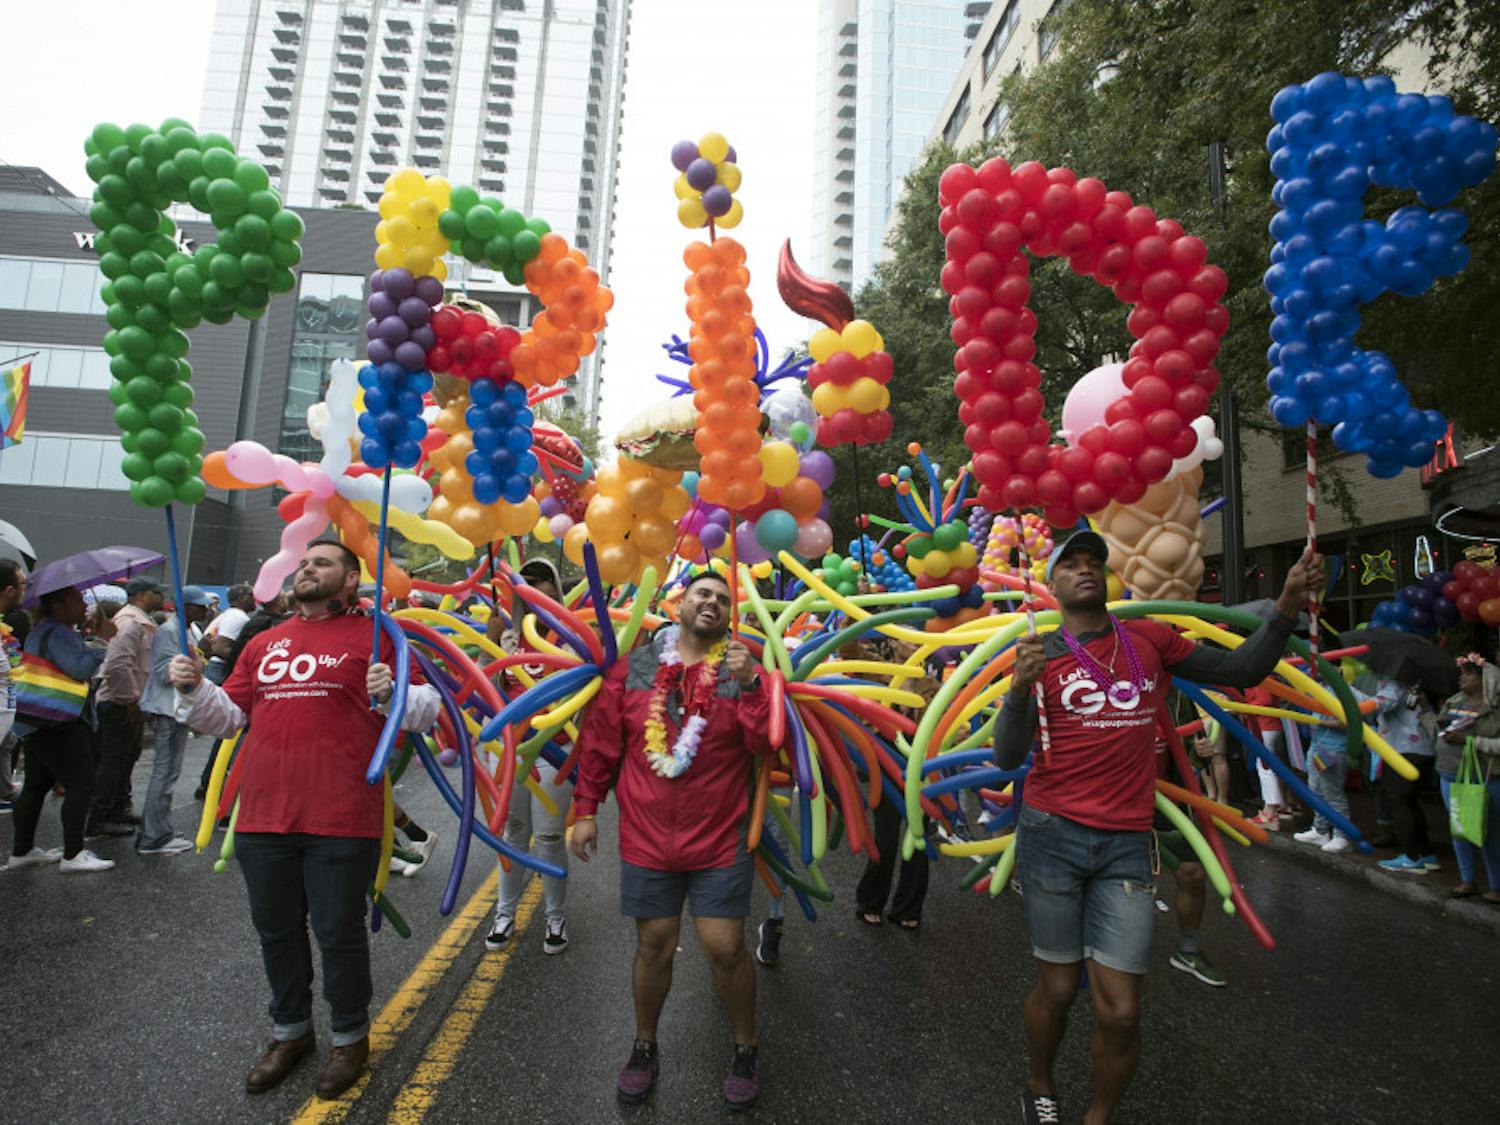 Employees from a local business supporting LGBTQ rights march during the city's annual Gay Pride parade on Sunday, Oct. 13, 2019, in Atlanta. (AP Photo/Robin Rayne)